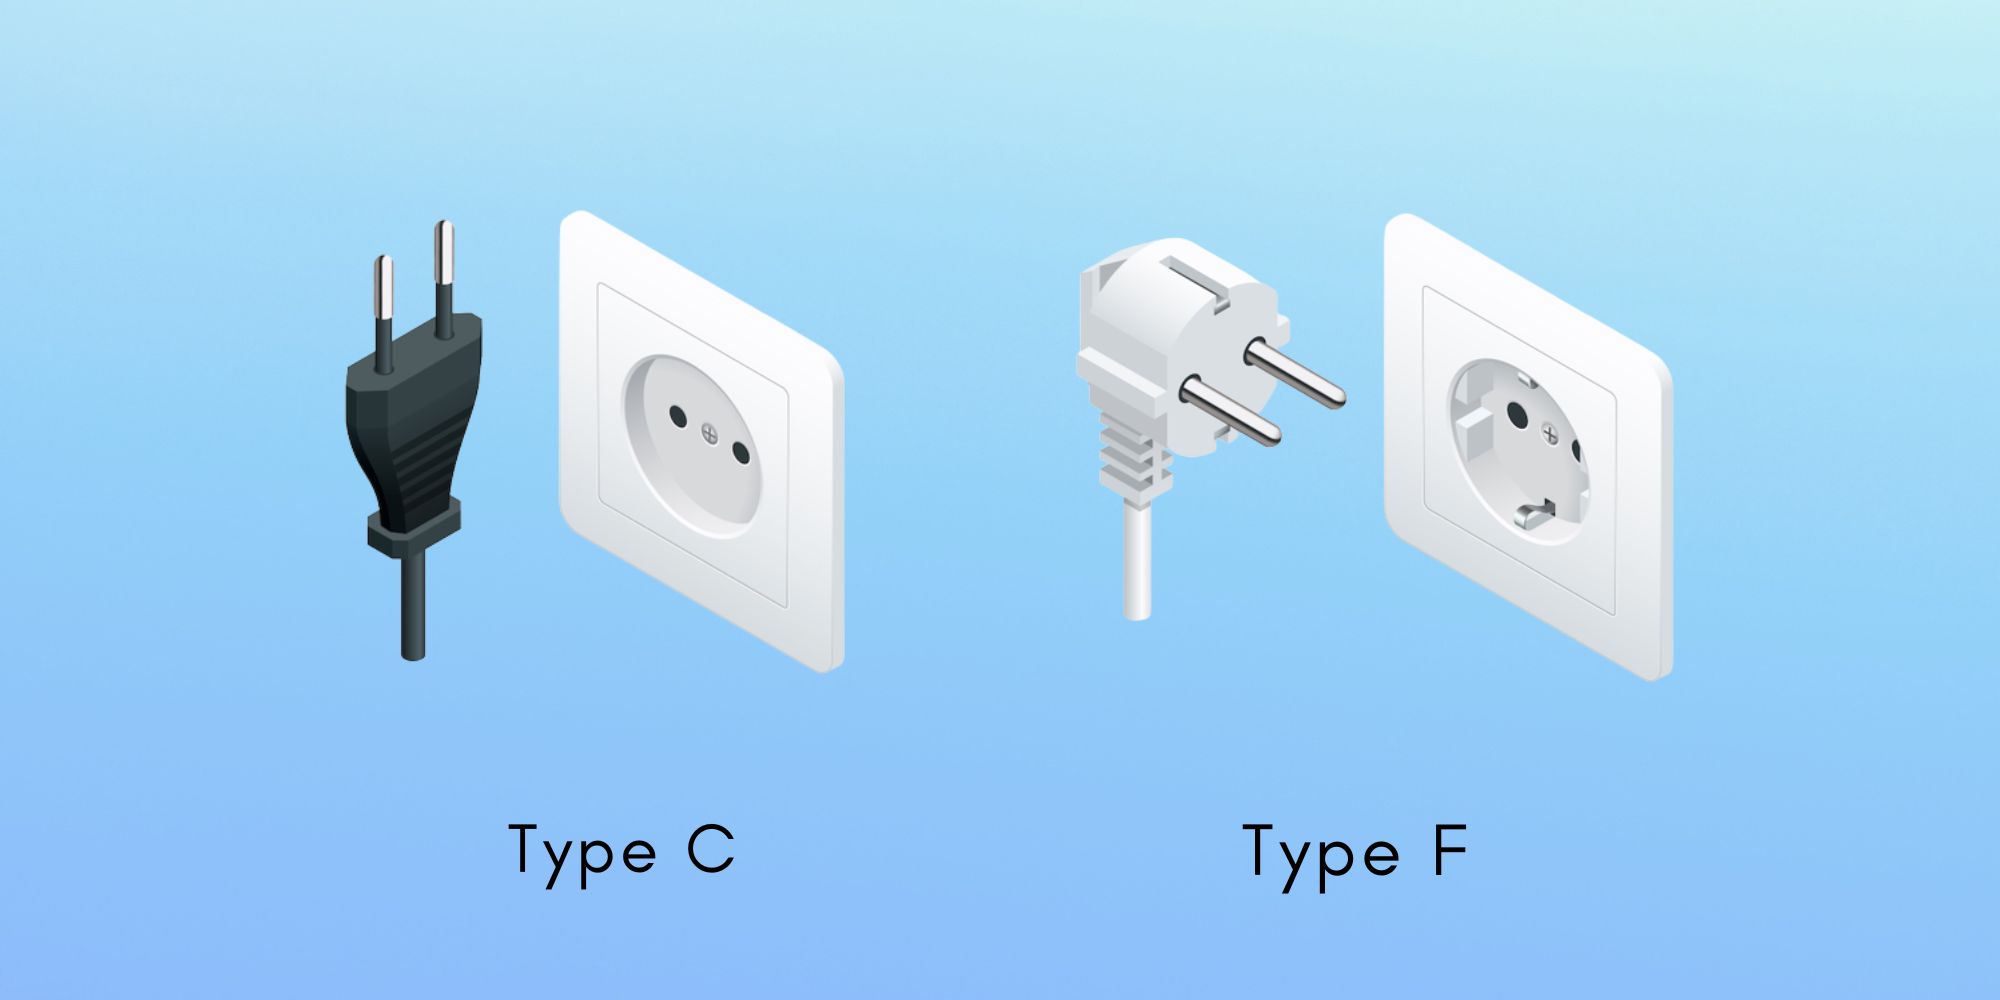 Kazakhstan Power Plugs and Sockets: Type C and Type F
